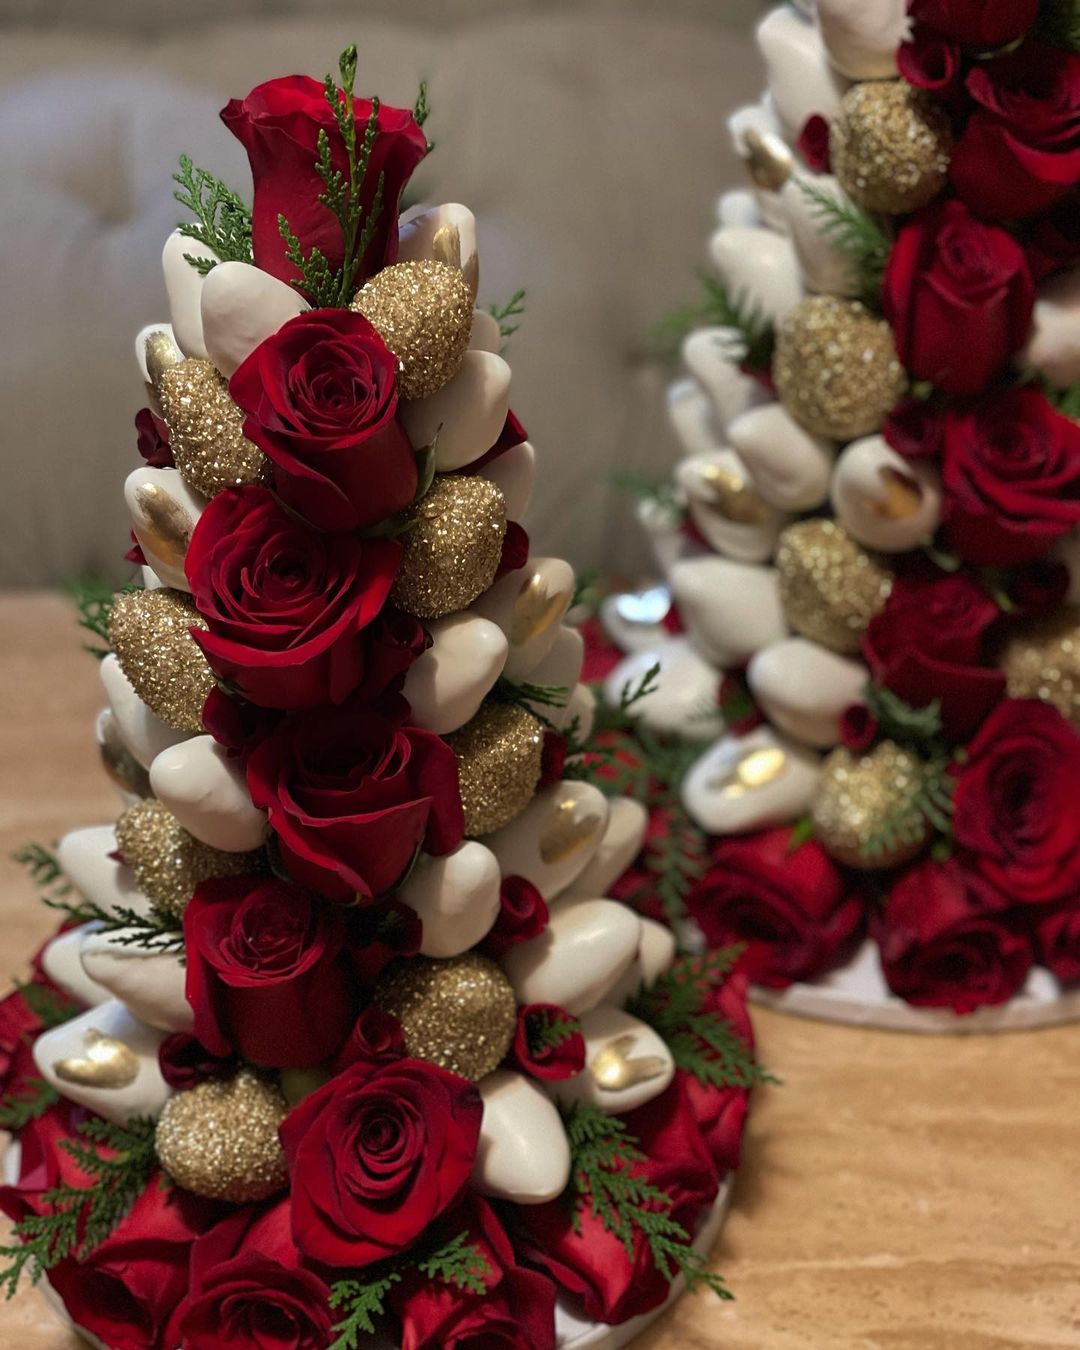 Christmas Chocolate Strawberry Tower with Roses | Festive Dessert and Table Decor, Lunch Bunch